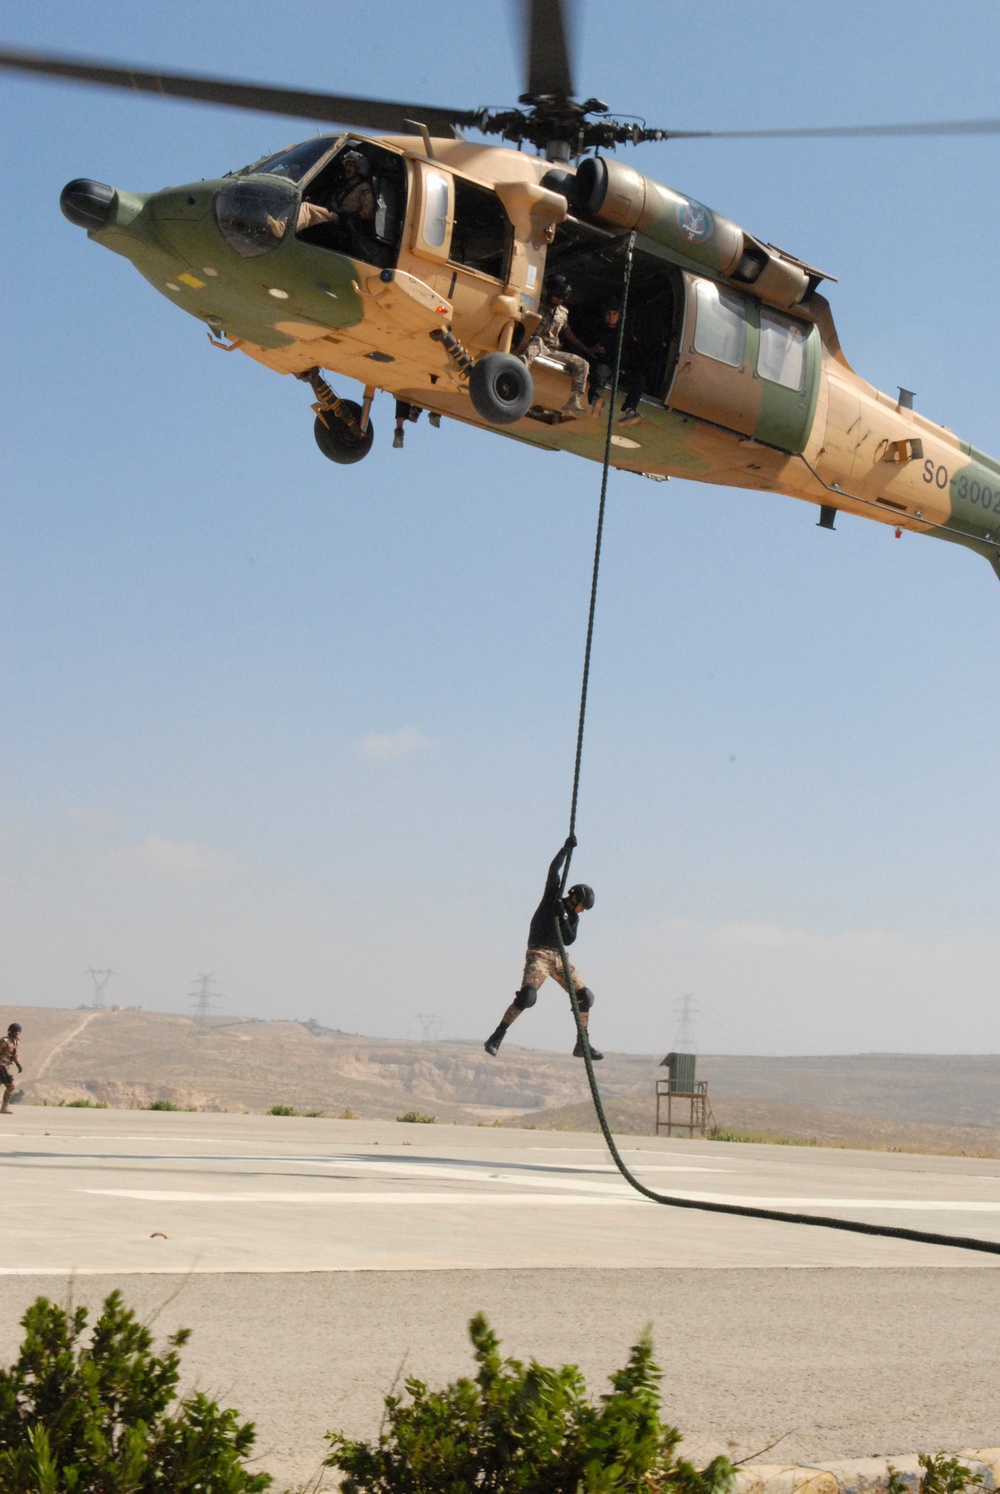 Fast rope training readies soldiers for Eager Lion exercises